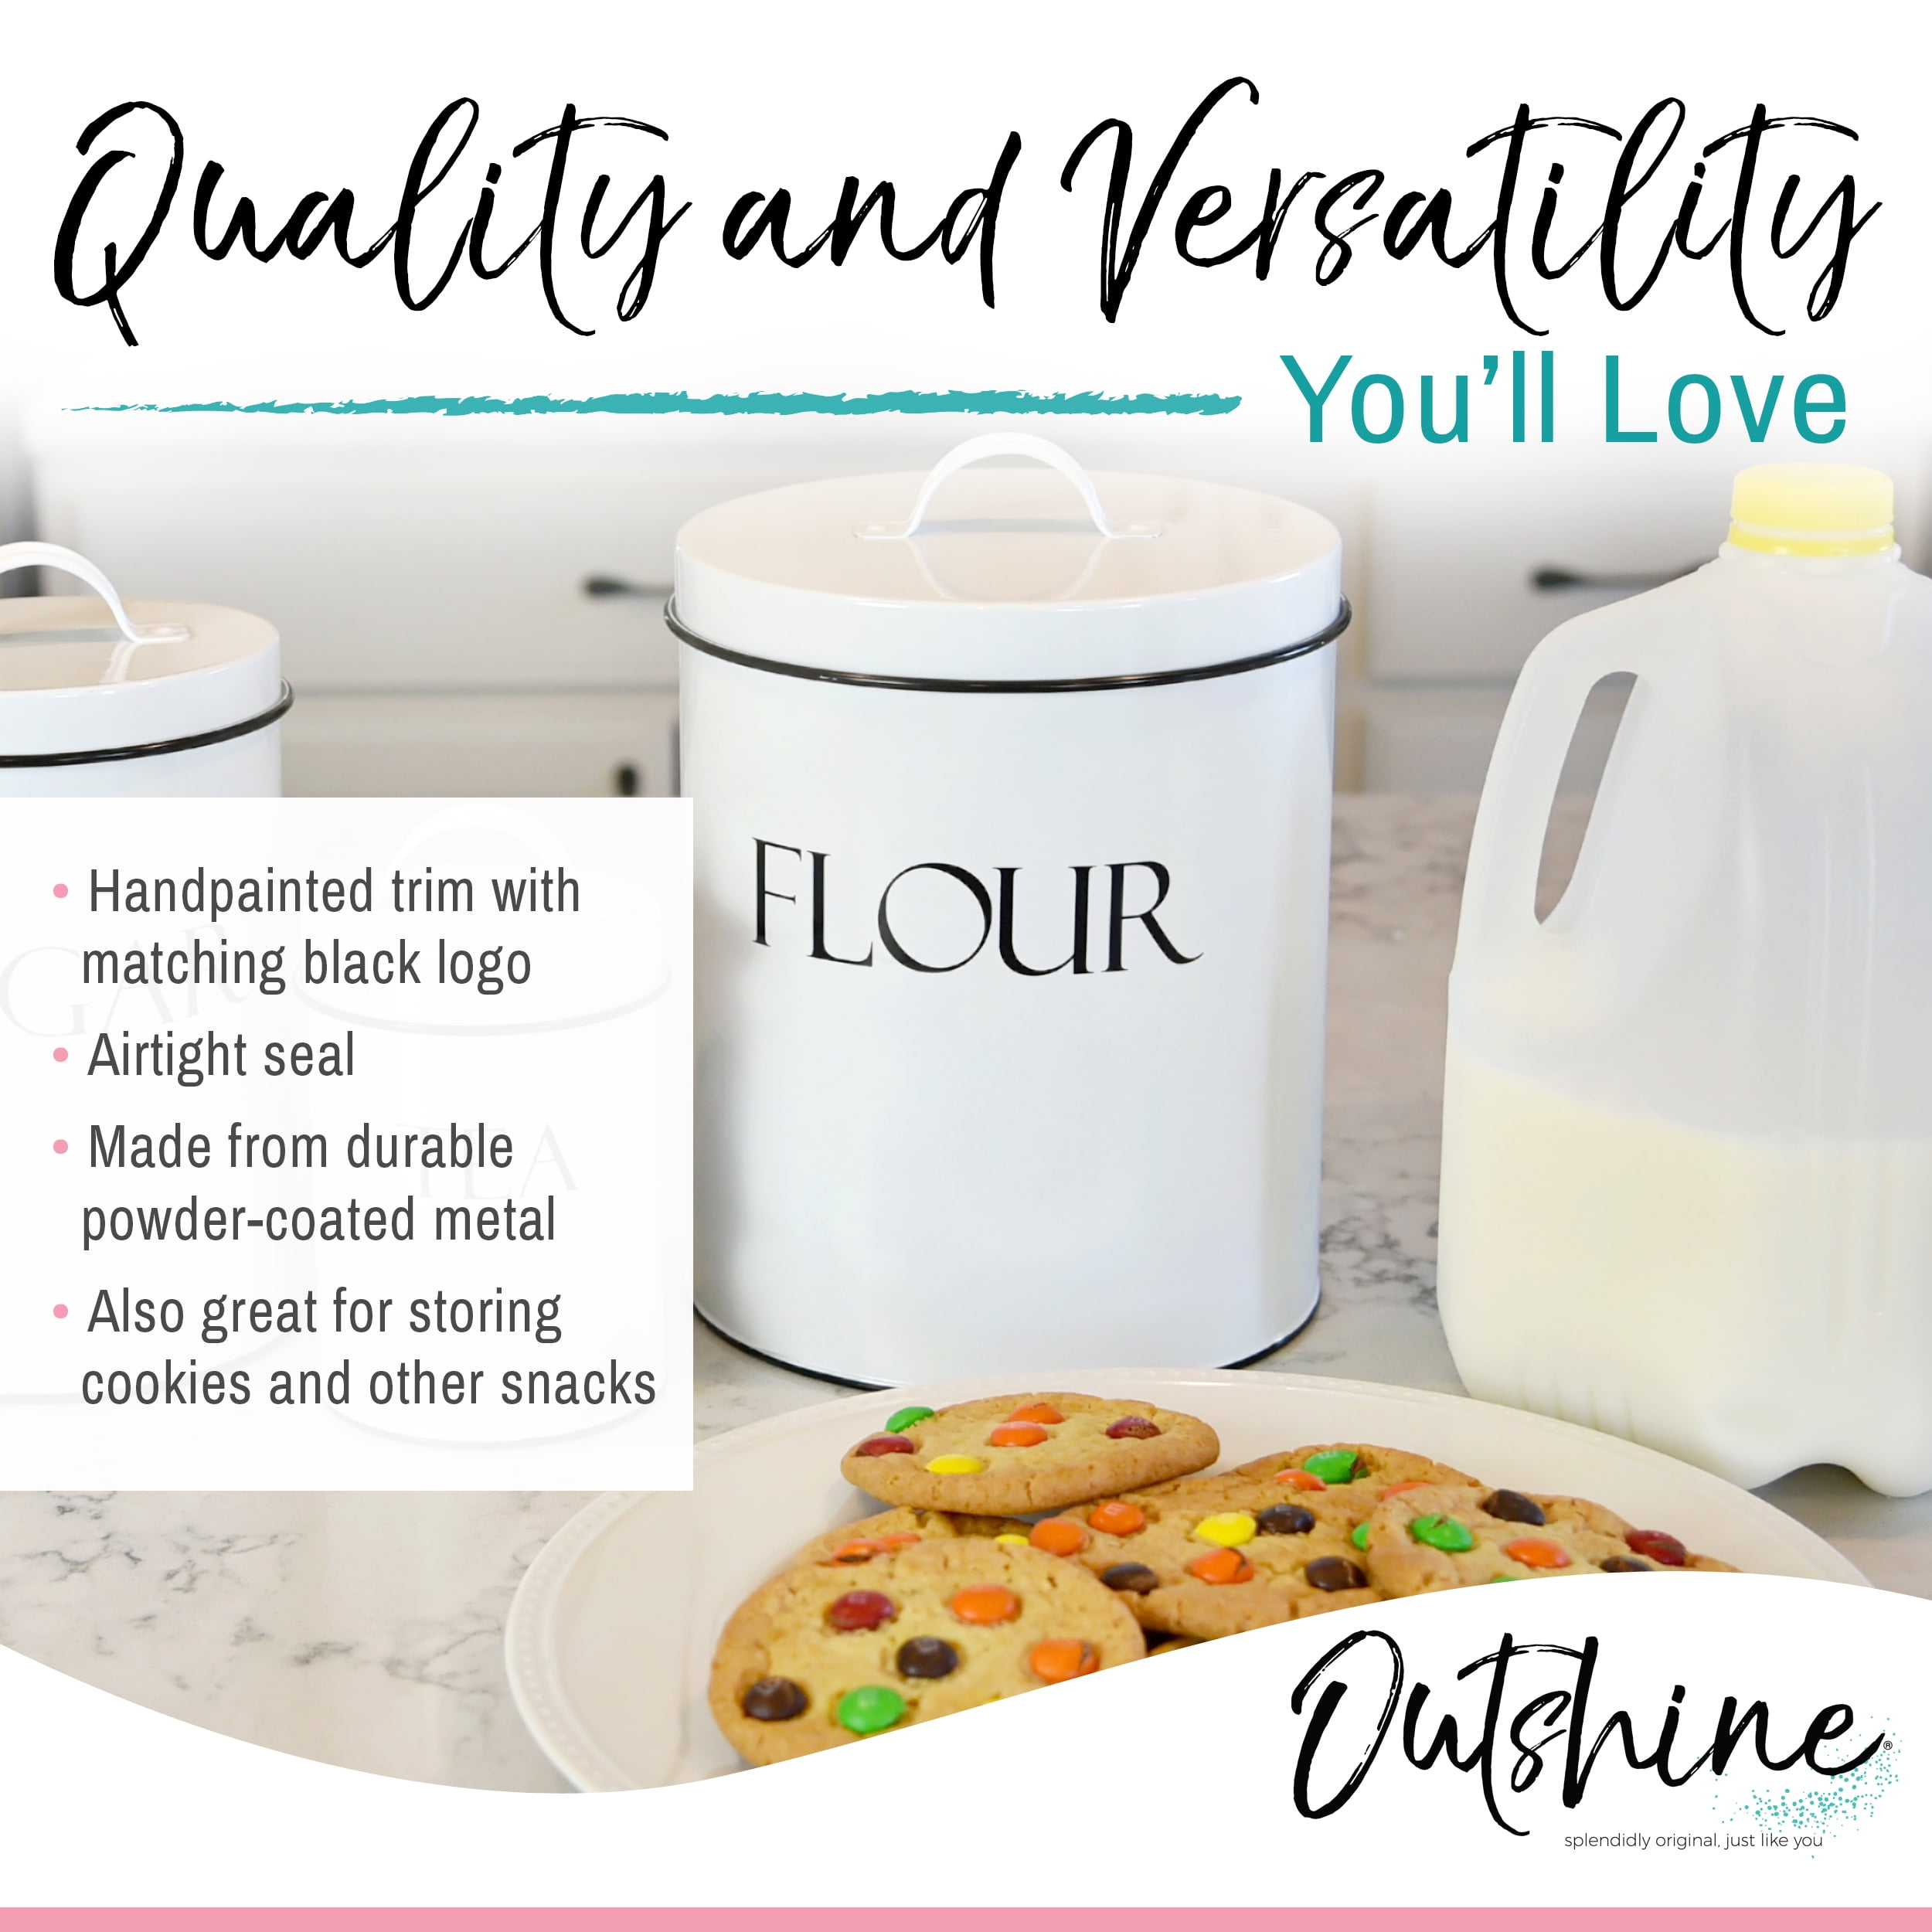 Outshine Farmhouse Round Tin Snack Containers with Lids - Set of 2, White, Airtight Food Storage Containers for Biscuits, Cookies, Chocolates, Toddler  Food, Baby Snacks